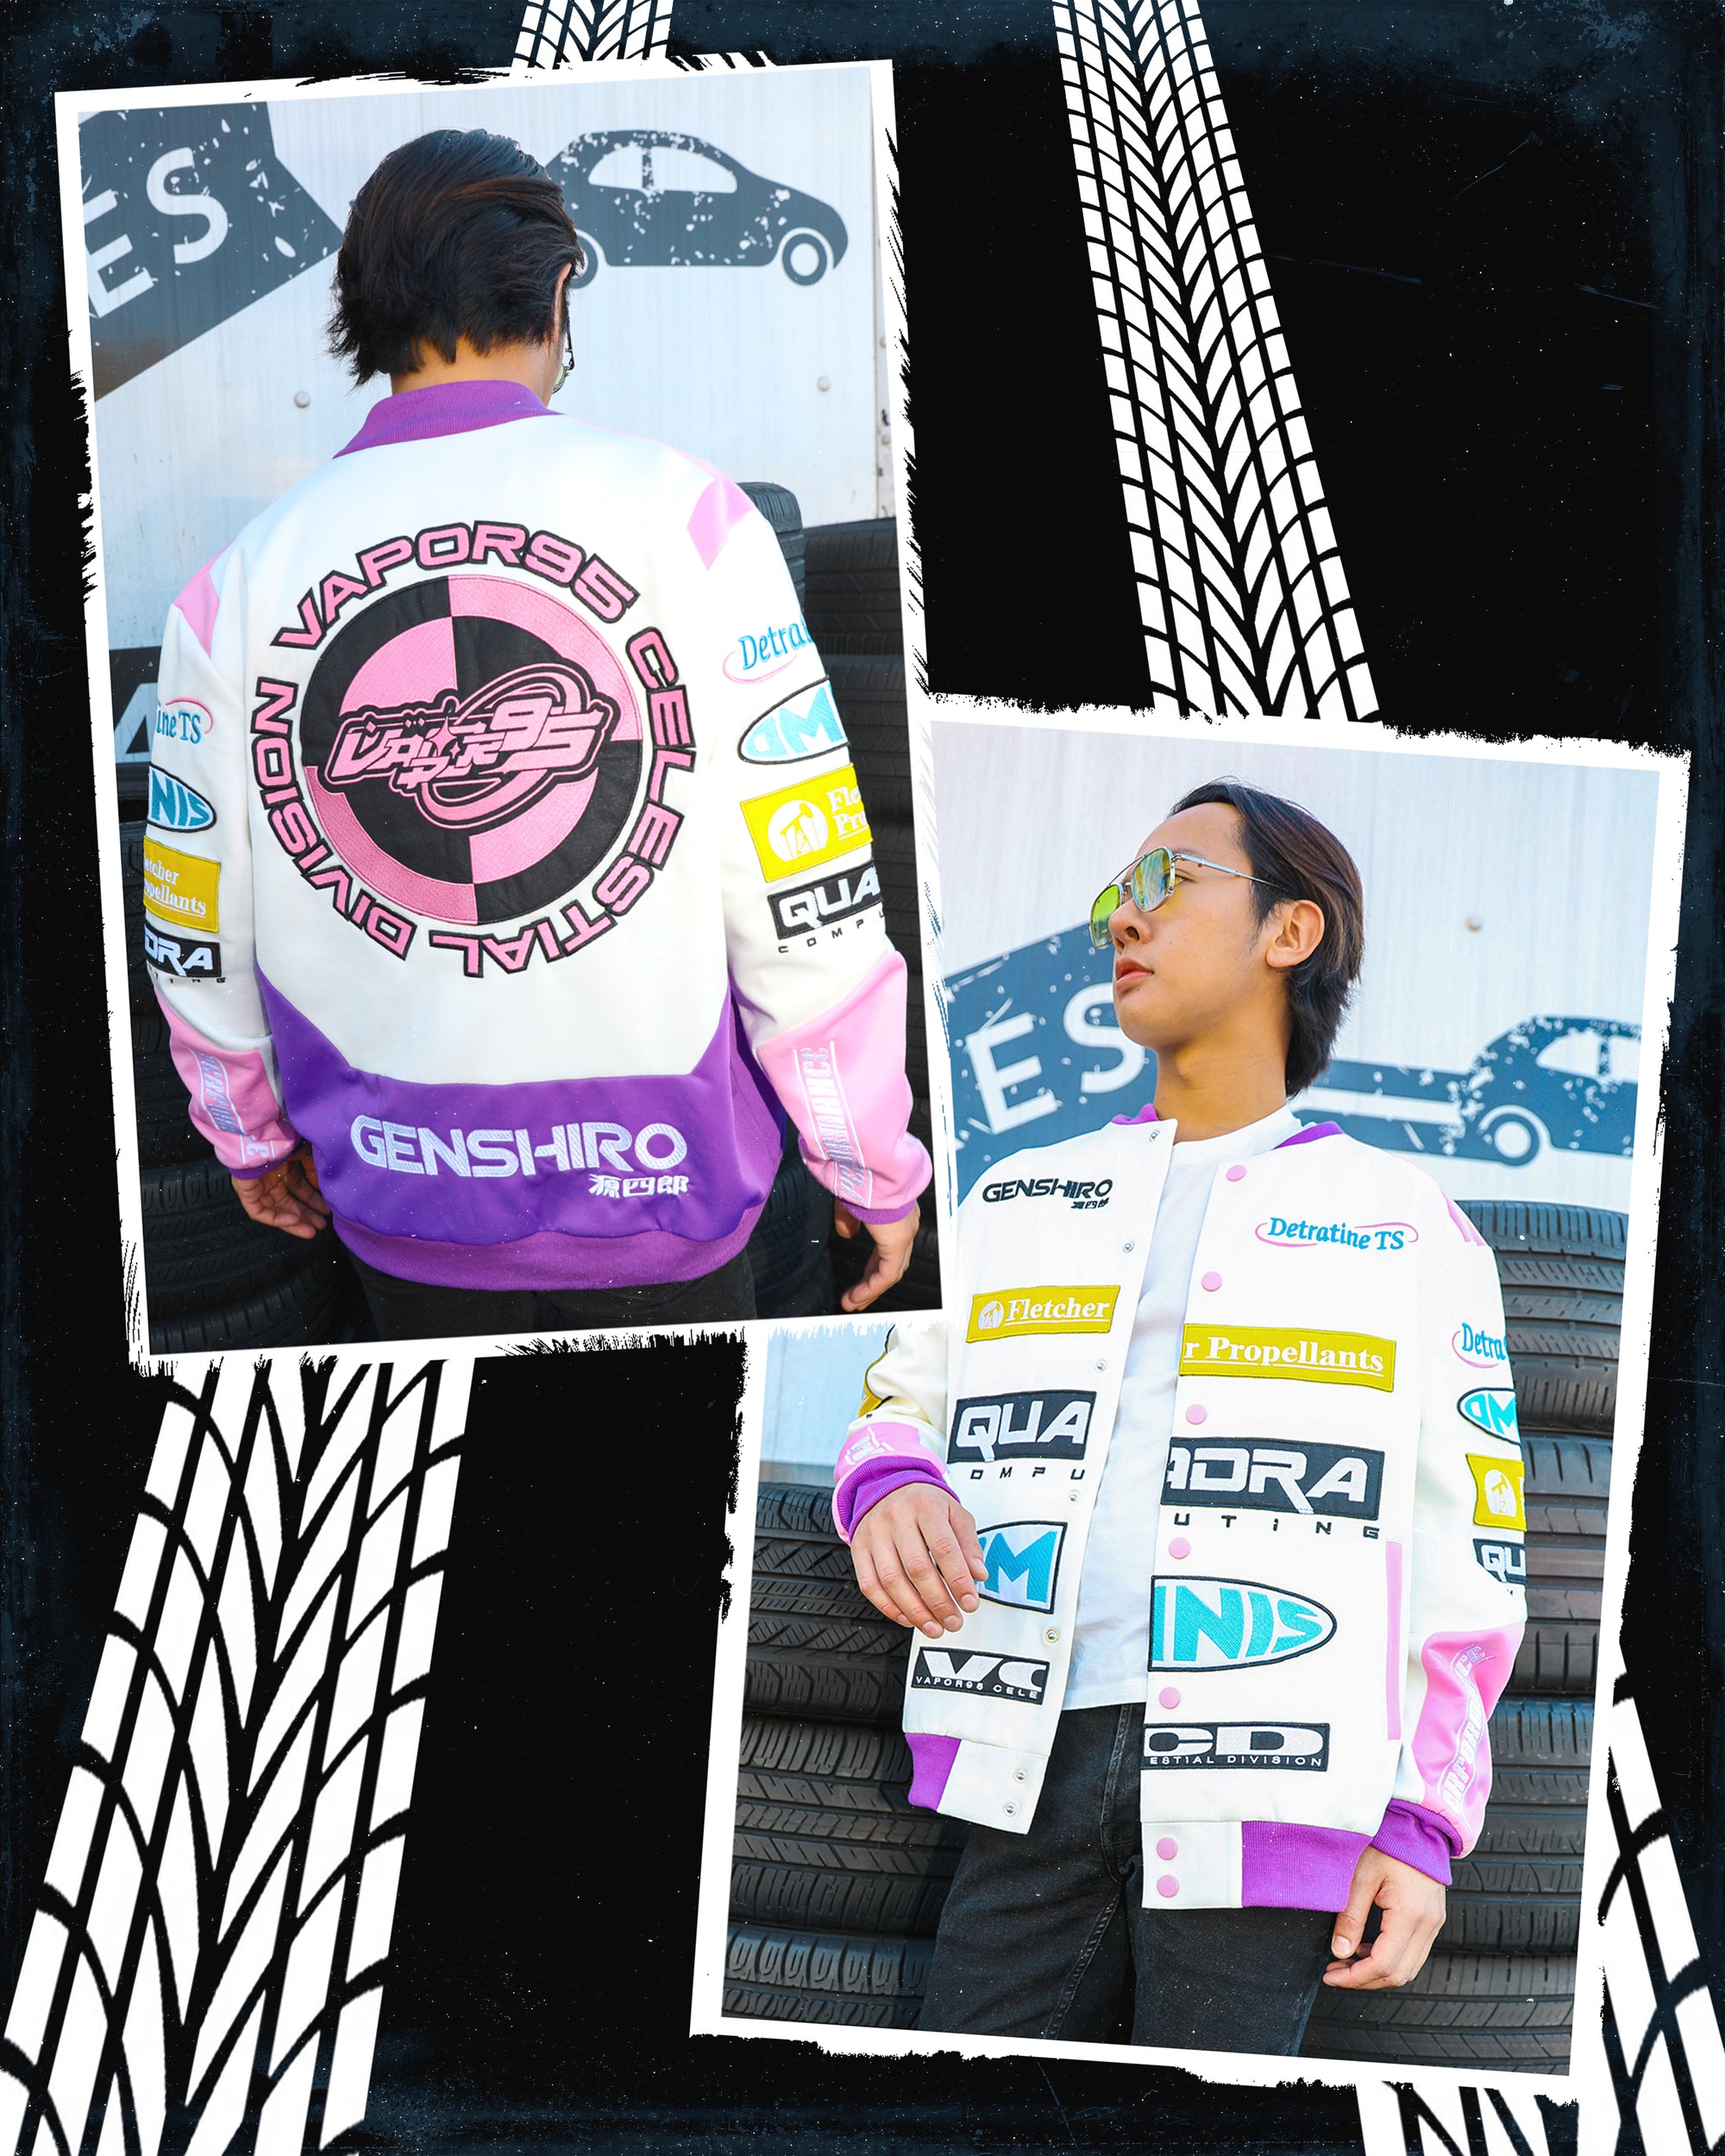 Celestial Division Racing Jacket